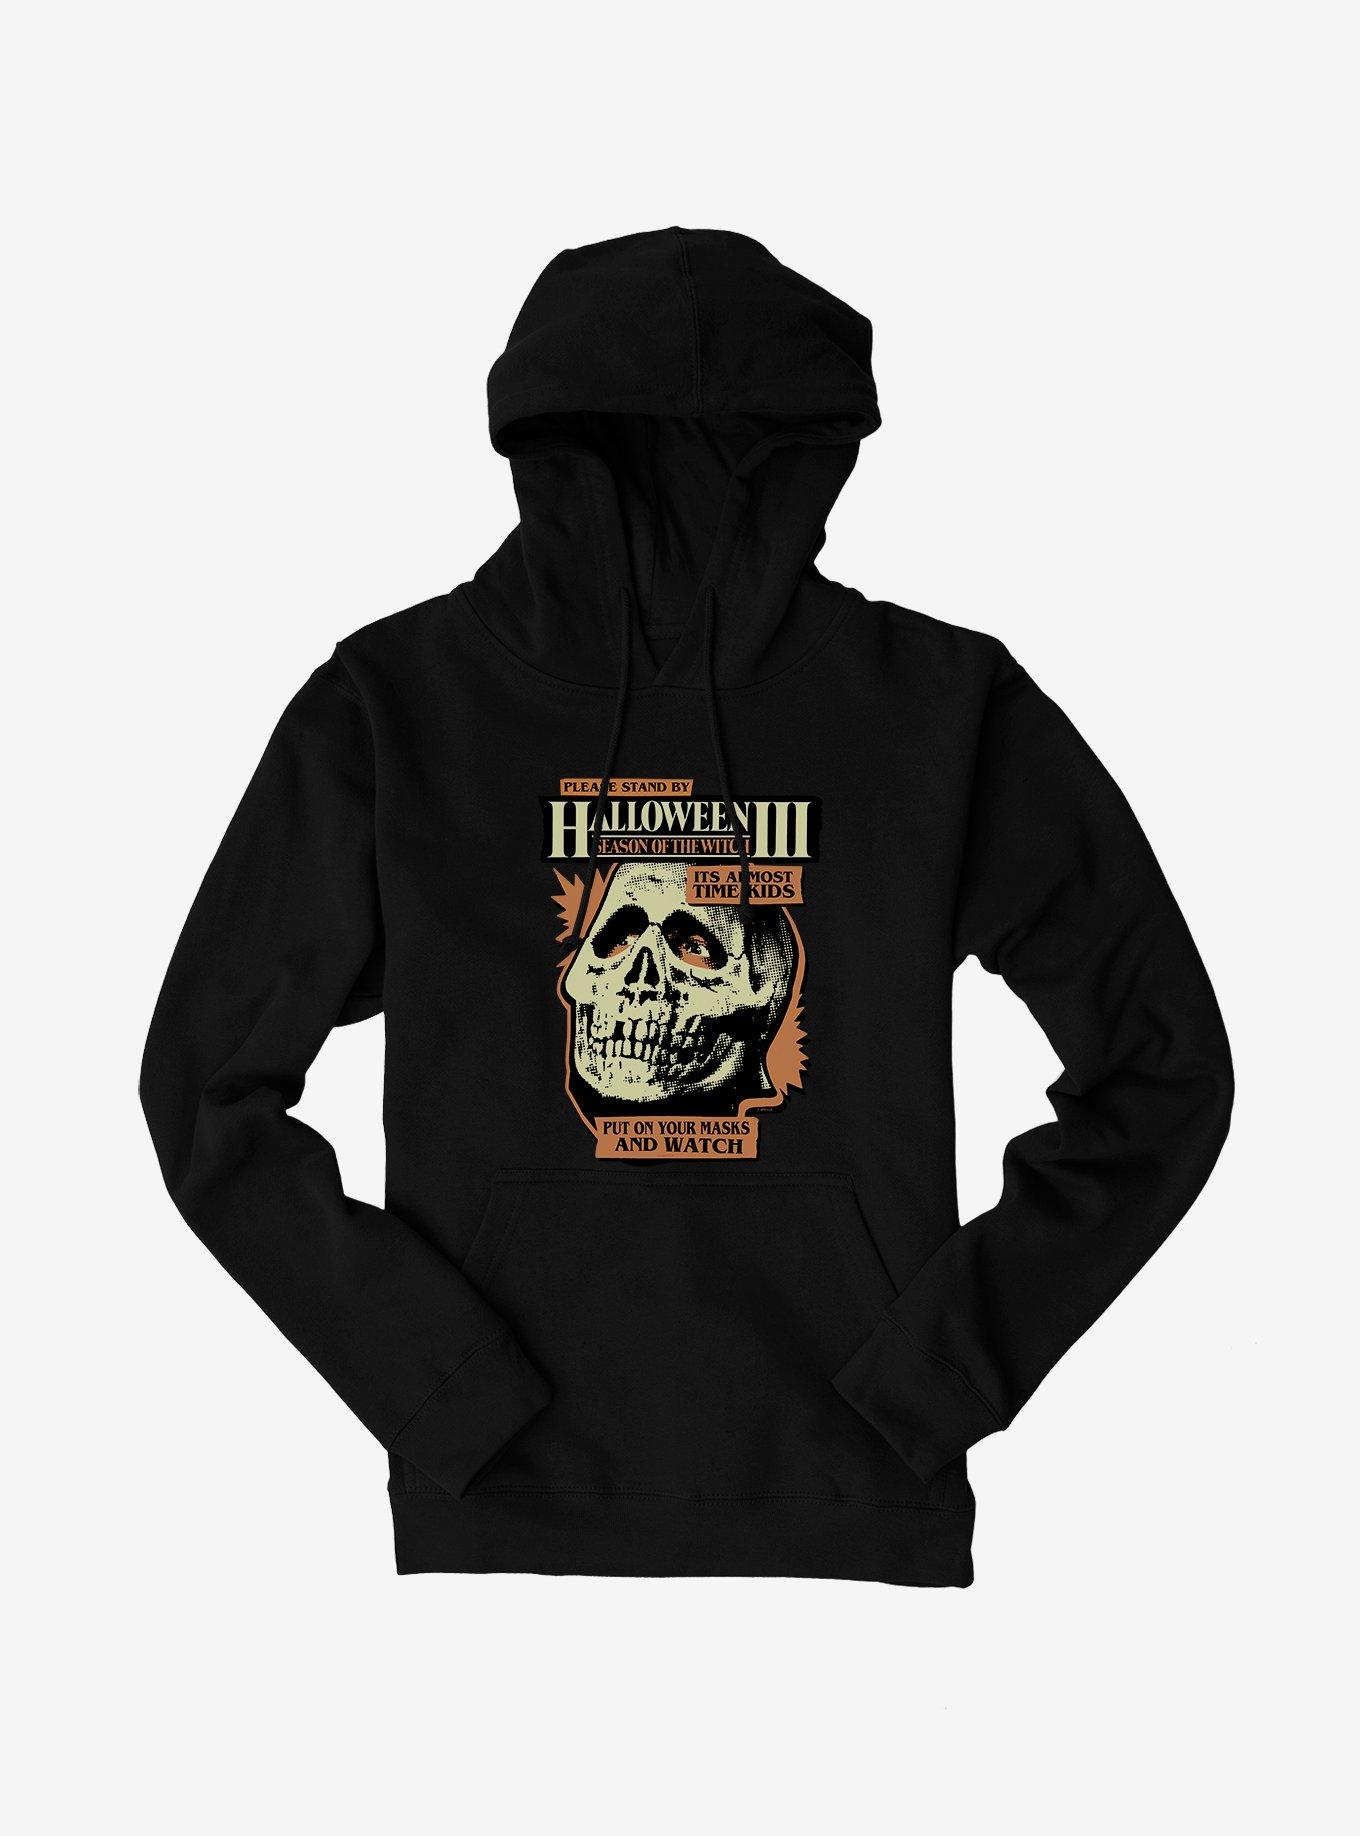 Halloween III: Season Of The Witch Please Stand By Hoodie, BLACK, hi-res